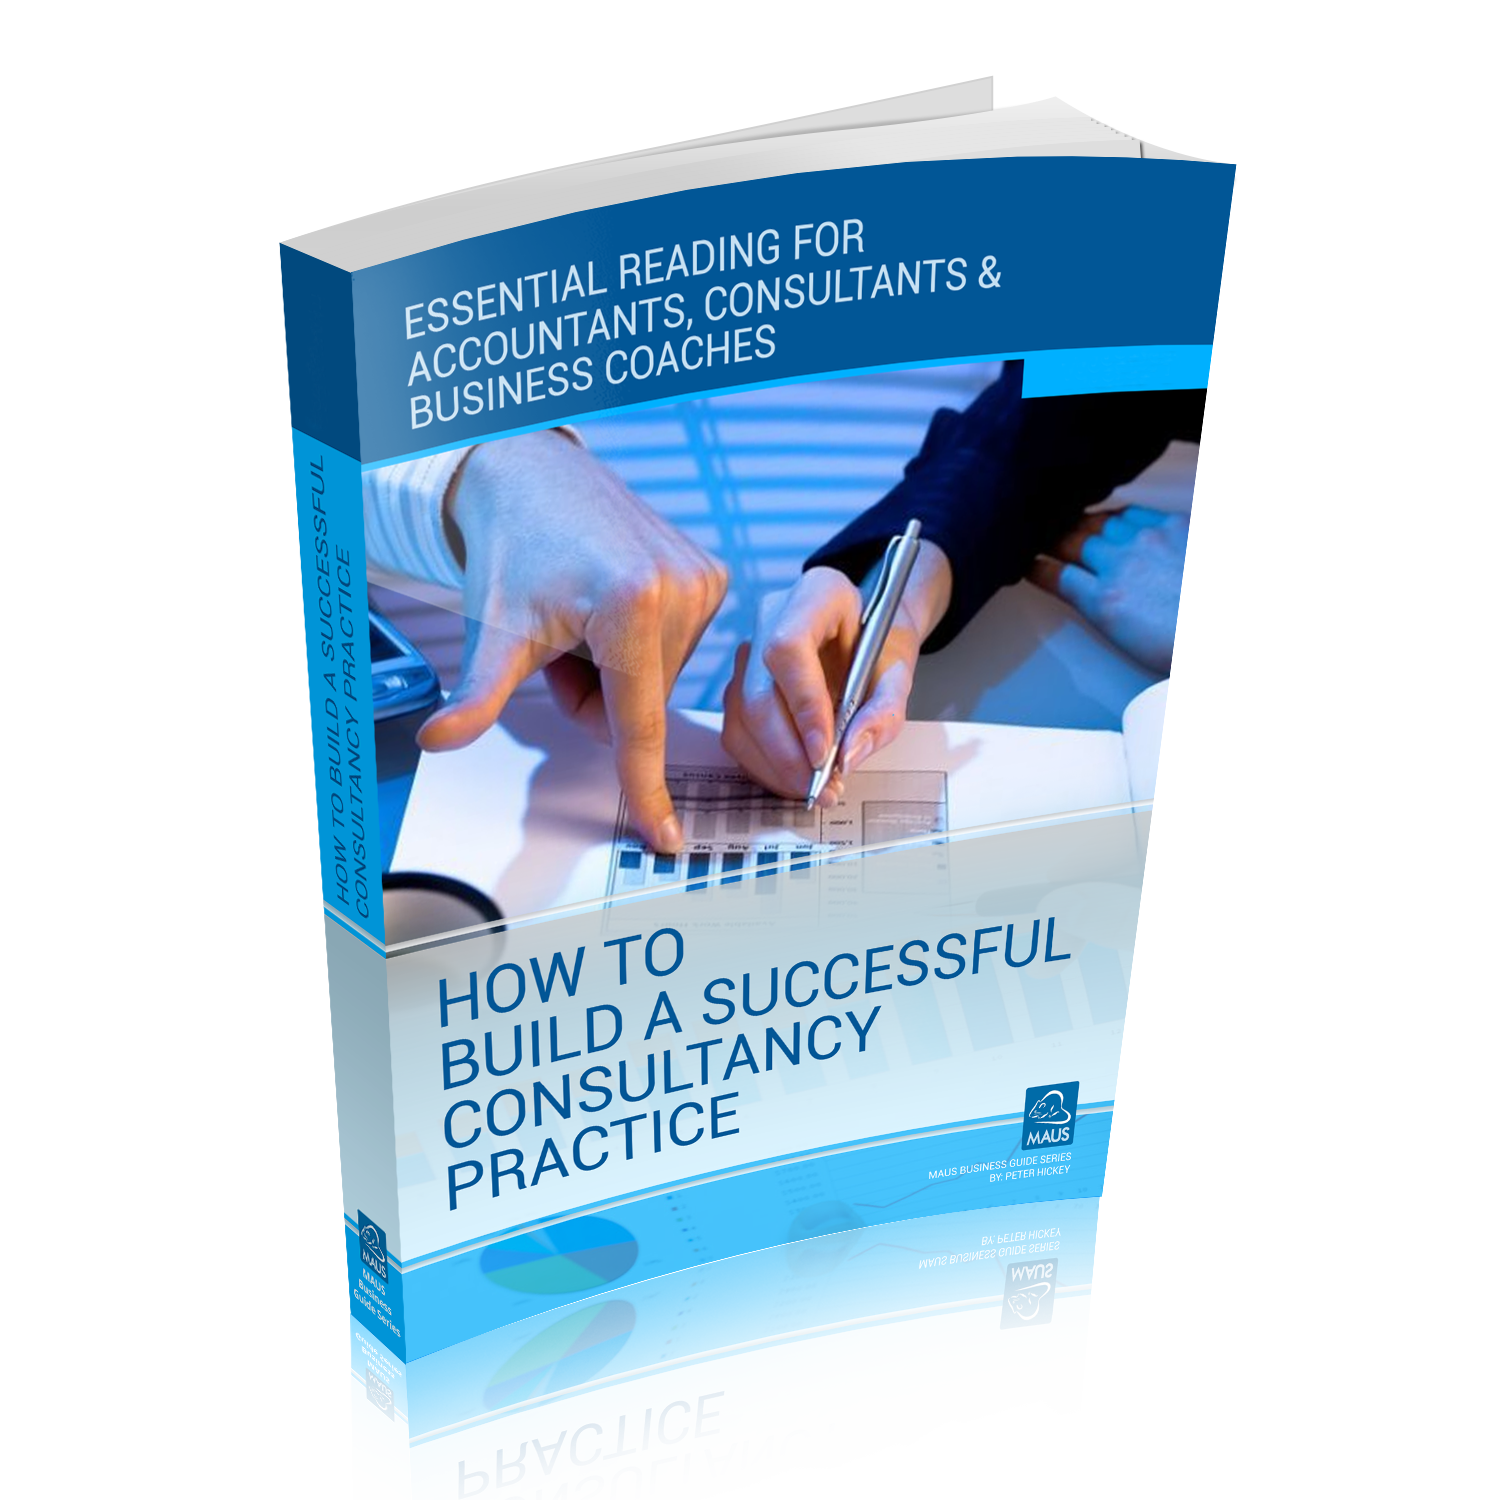 How To Build A Successful Consultancy Practice